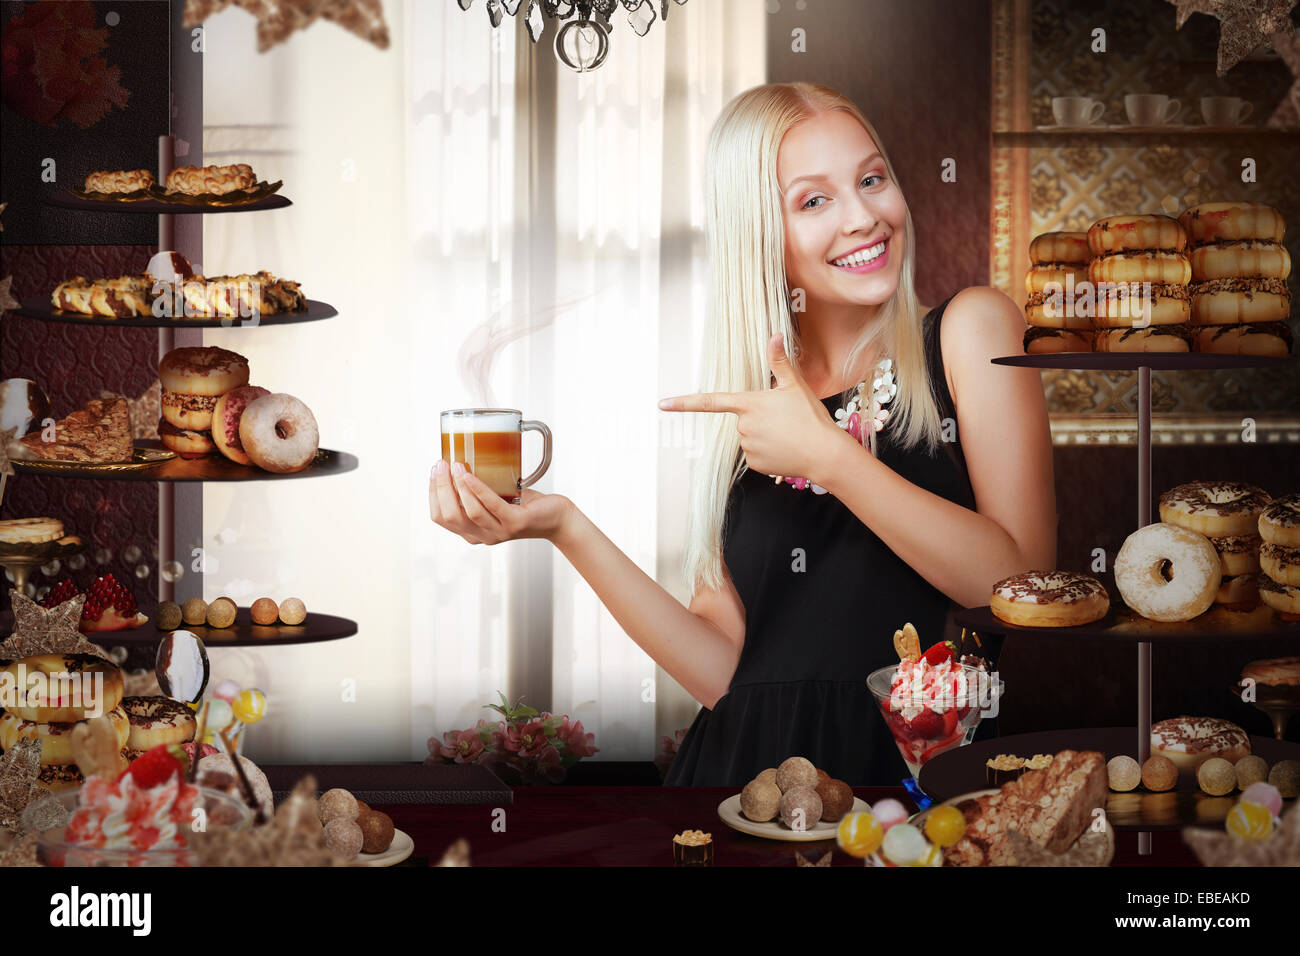 Bakery. Happy Saleswoman with Cup of Coffee in Bakeshop Stock Photo